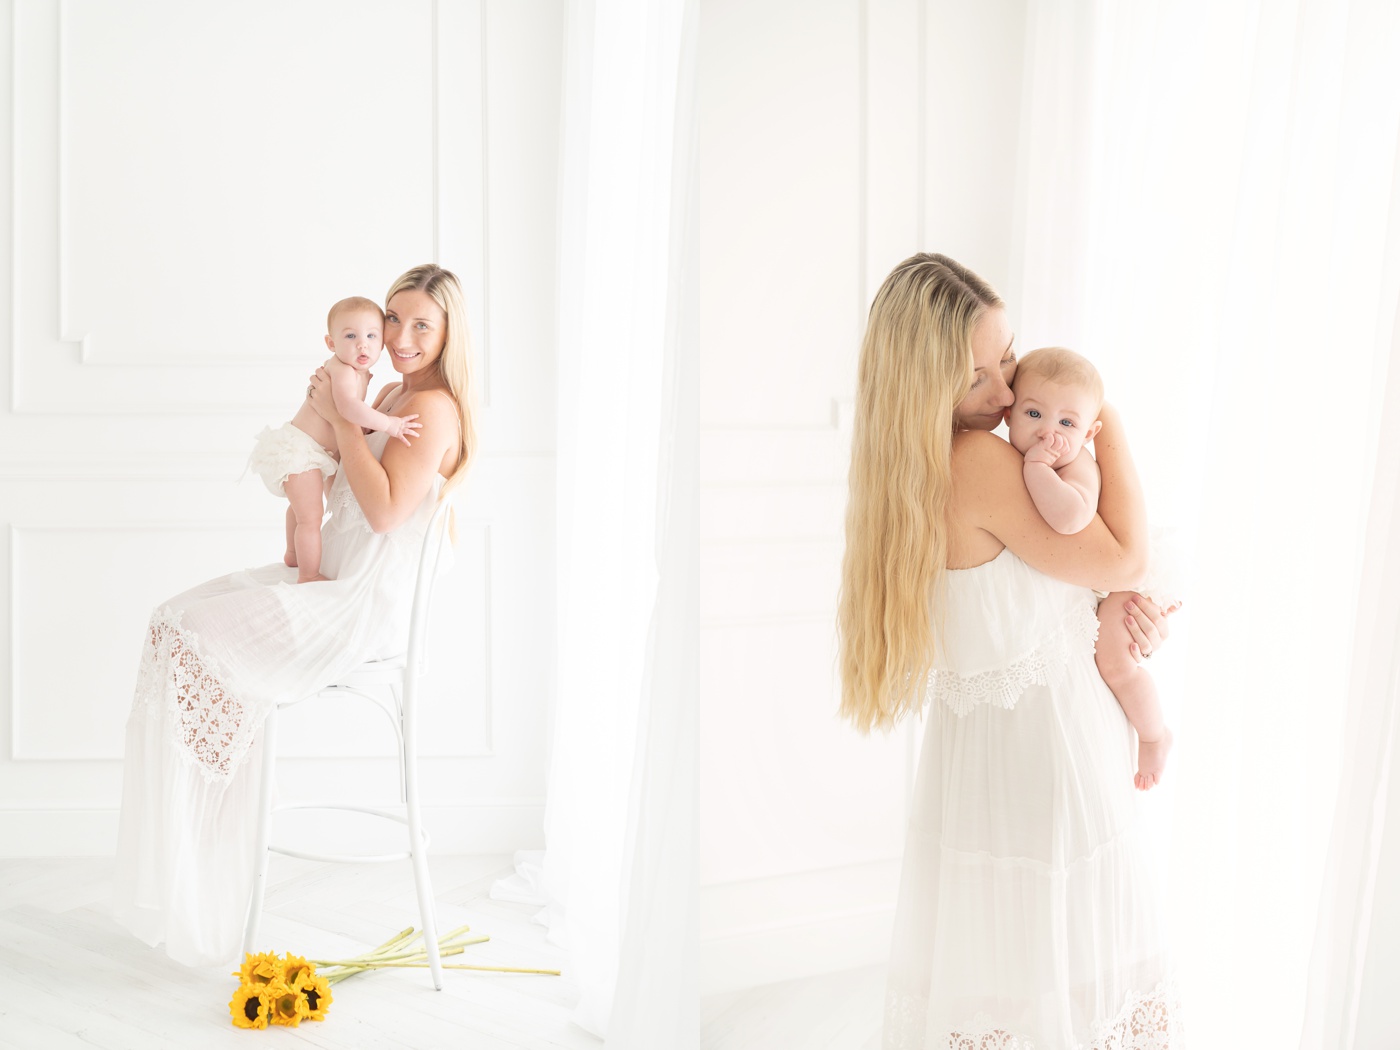 Mommy and baby being photographed in a photography studio wearing matching white dress and diaper cover